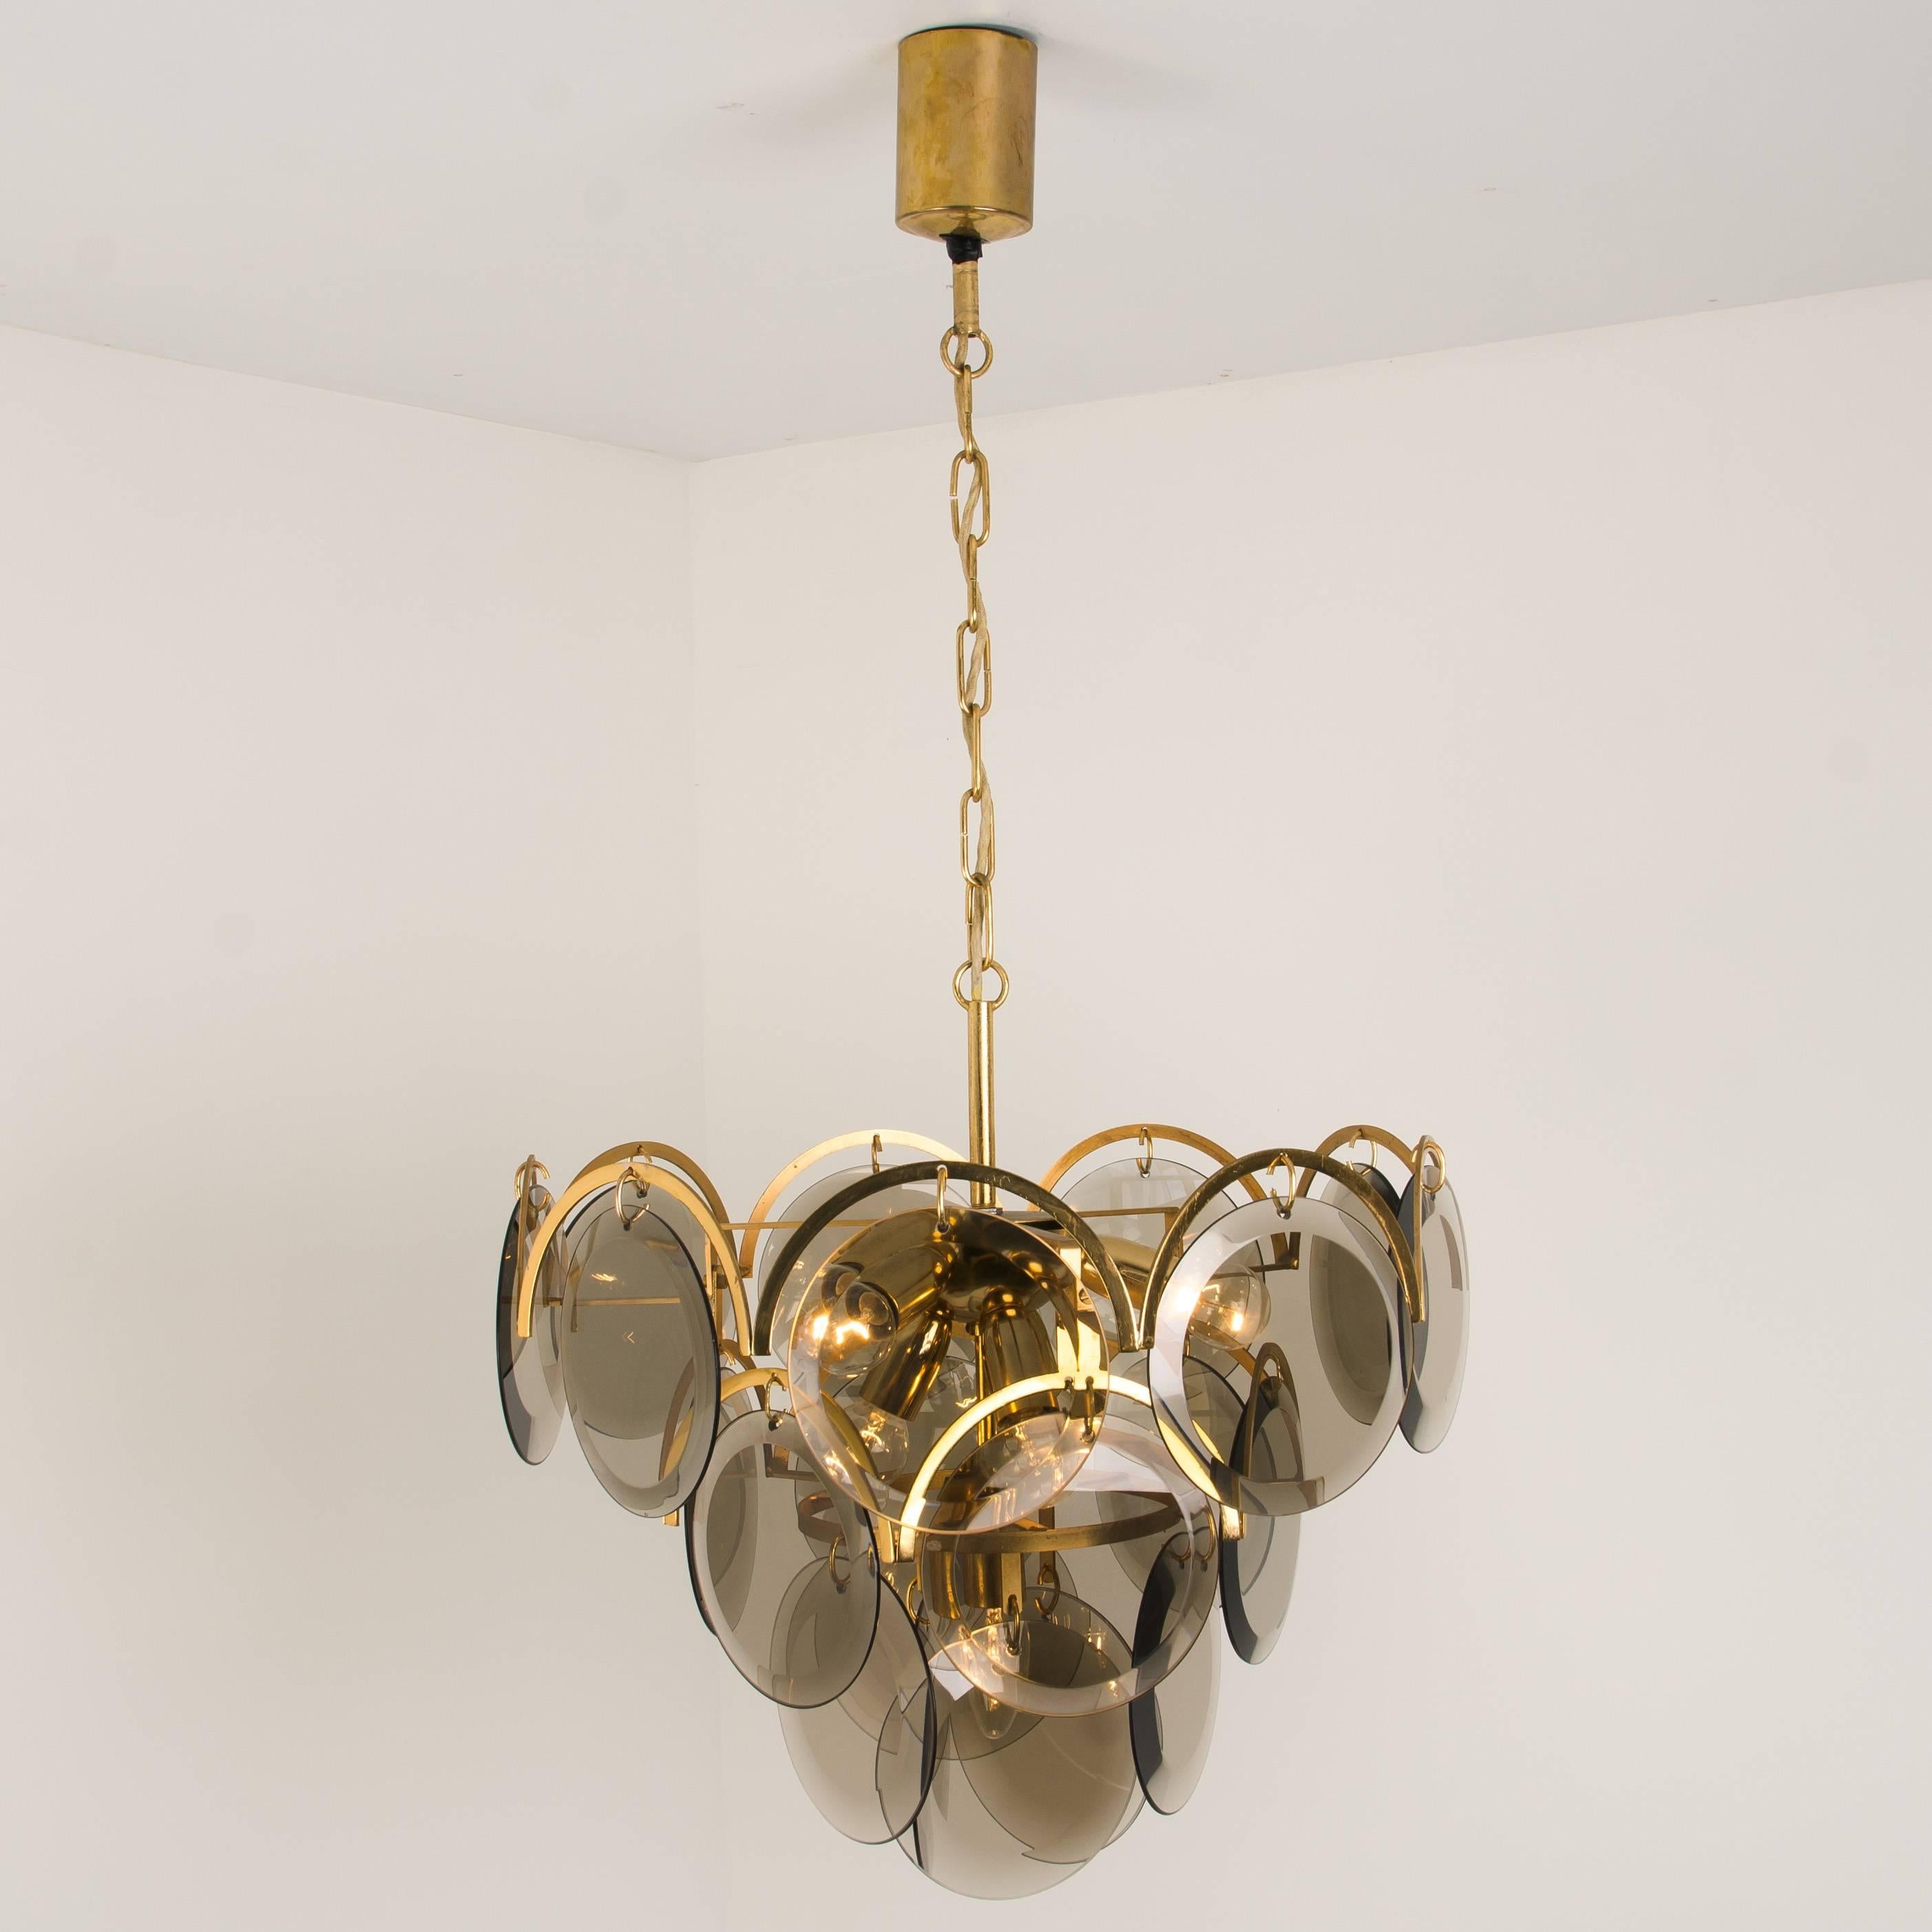 A gourgios four tiers hanging light fixture, attributed to Vistosi, Italy, manufactured in circa 1970 (late 1960s and early 1970s). With graduated tiers of smoked round facet chaped glass discs framed by half moon shaped brass. The chandelier is